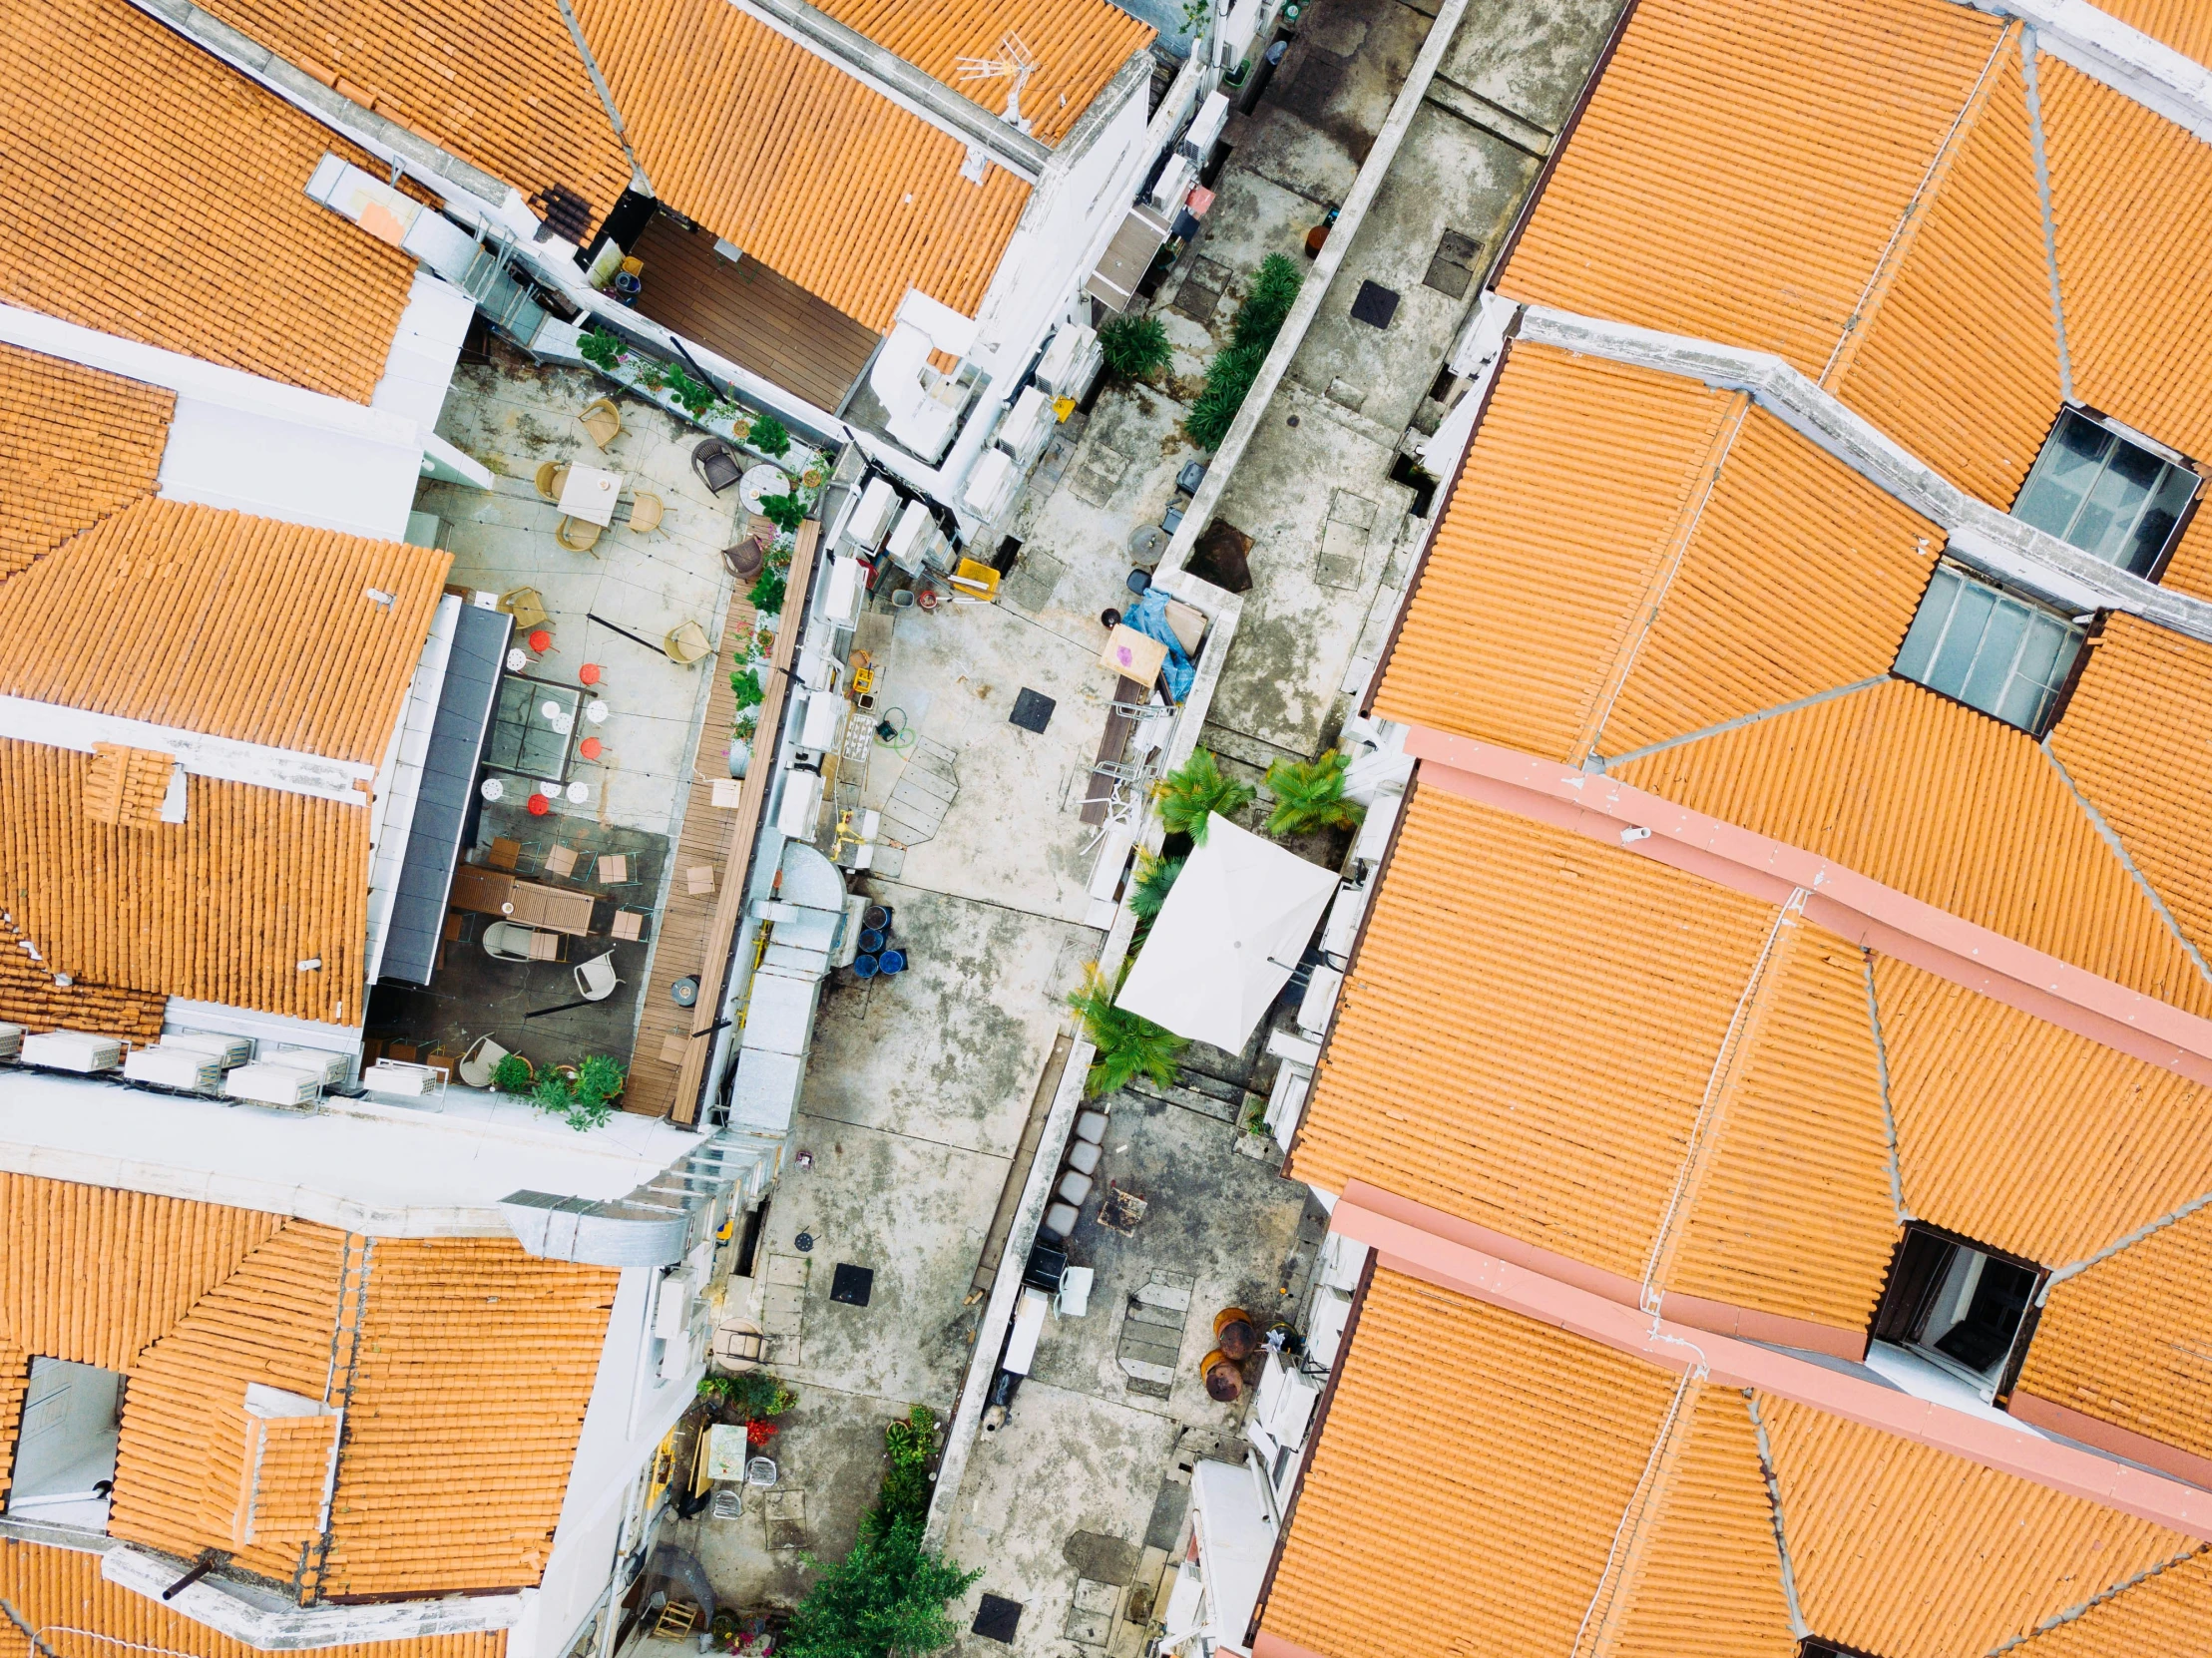 an aerial view of orange roofs in a small town